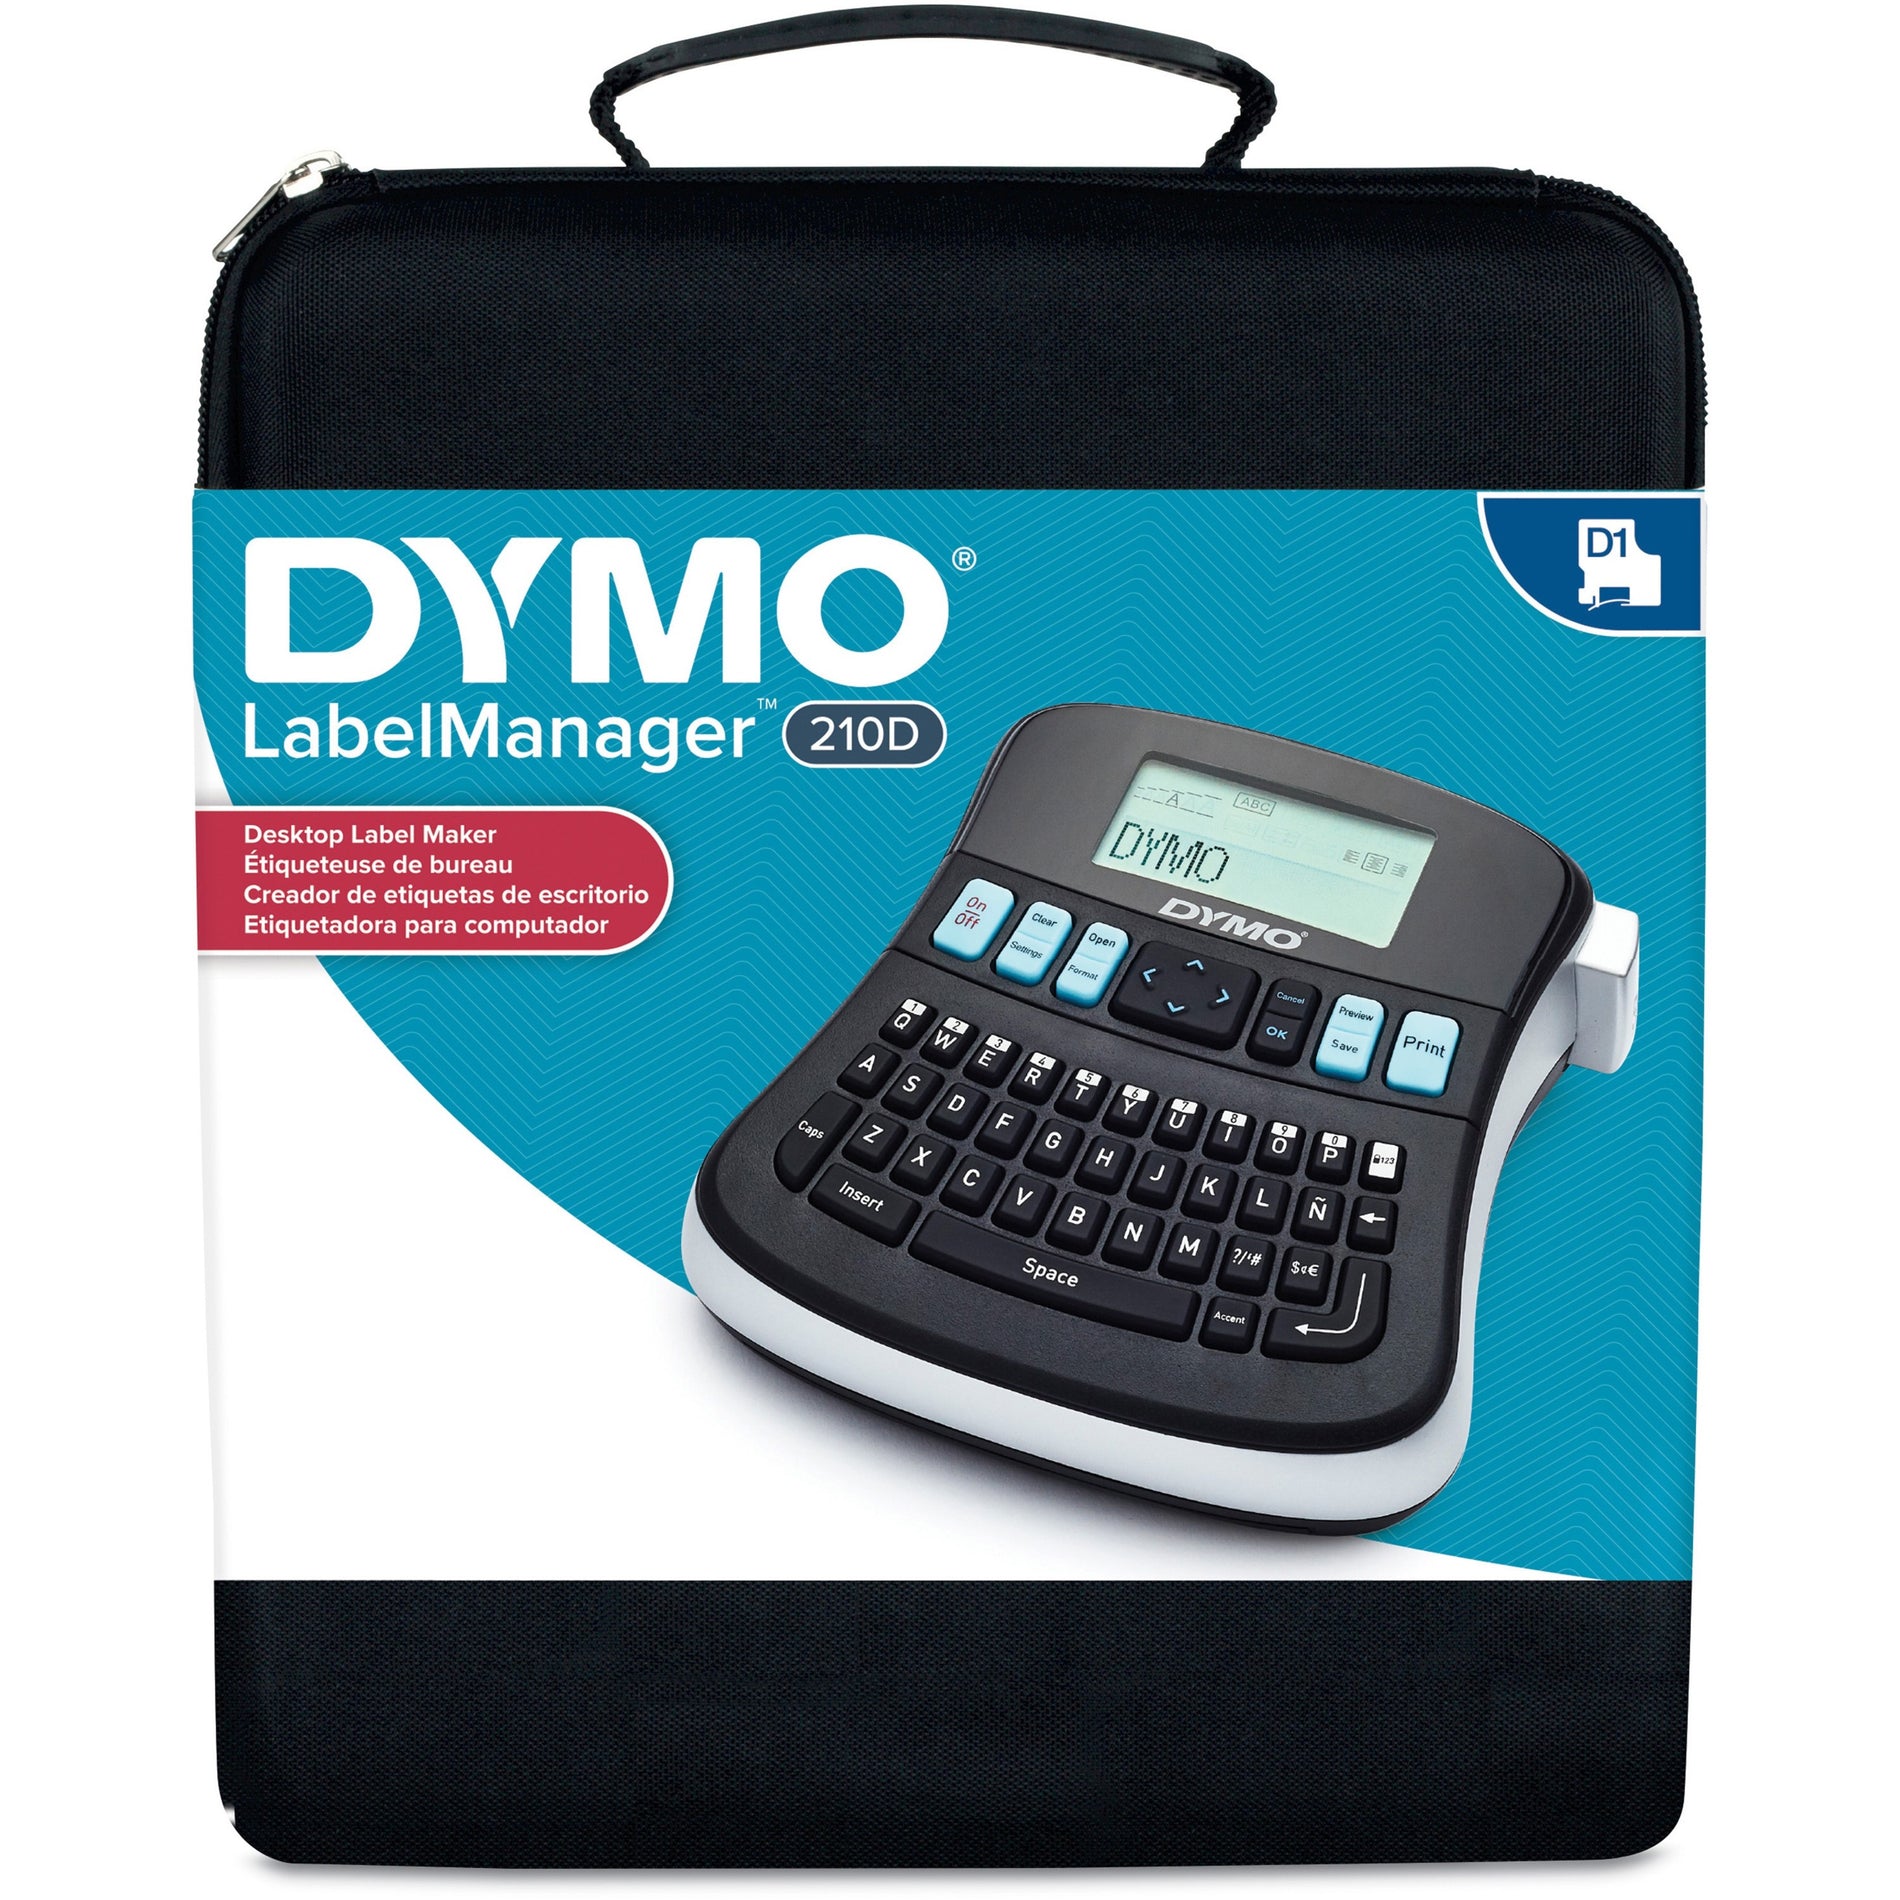 Dymo 1738976 LabelManager 210D Kit, Electronic Label Maker with Carrying Case, AC Adapter, and Two Tapes